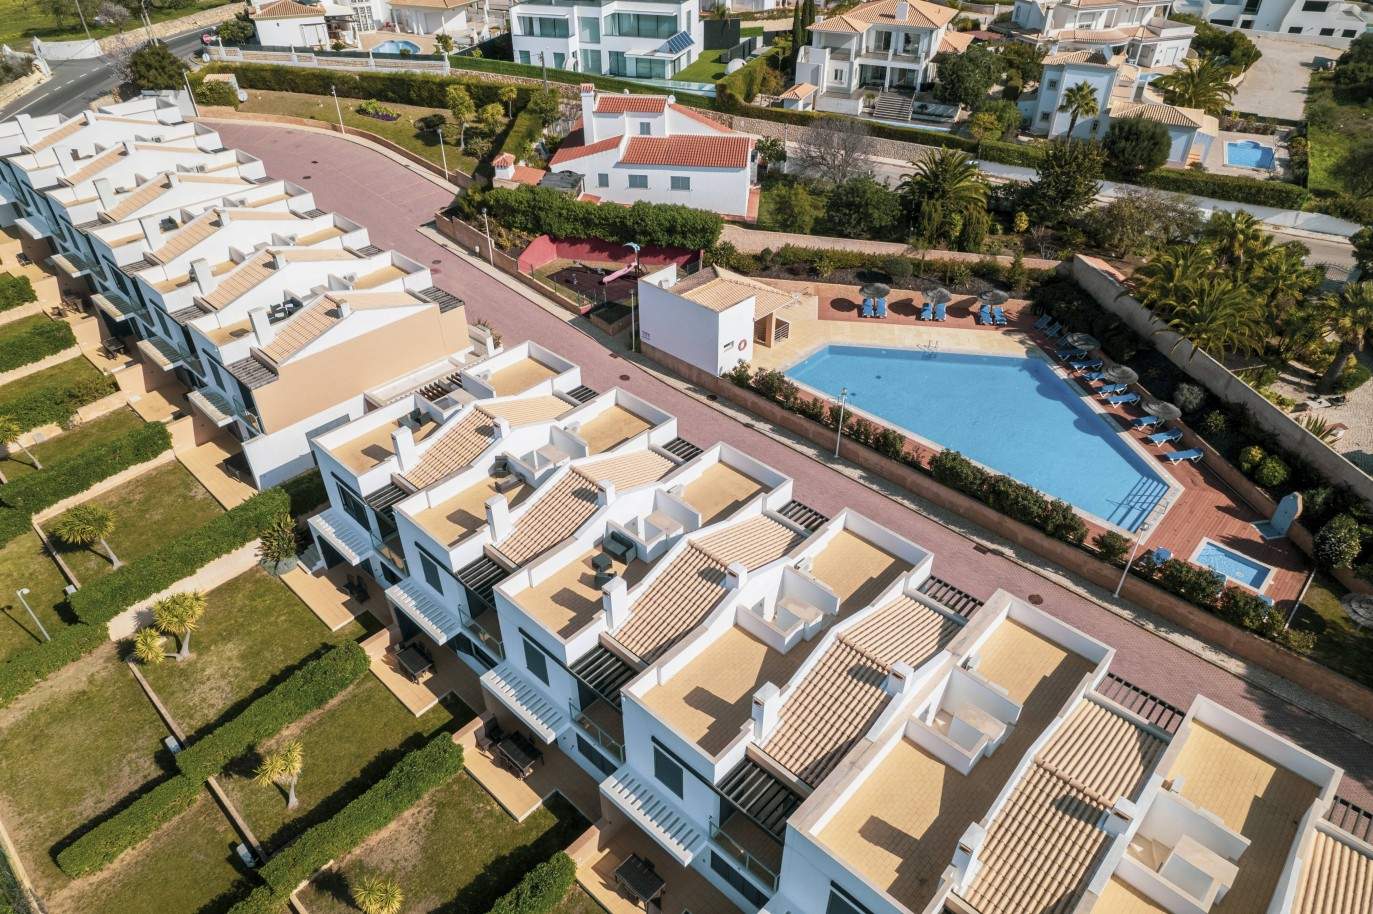 3 bedroom townhouses with sea view, for sale in Albufeira, Algarve_199199